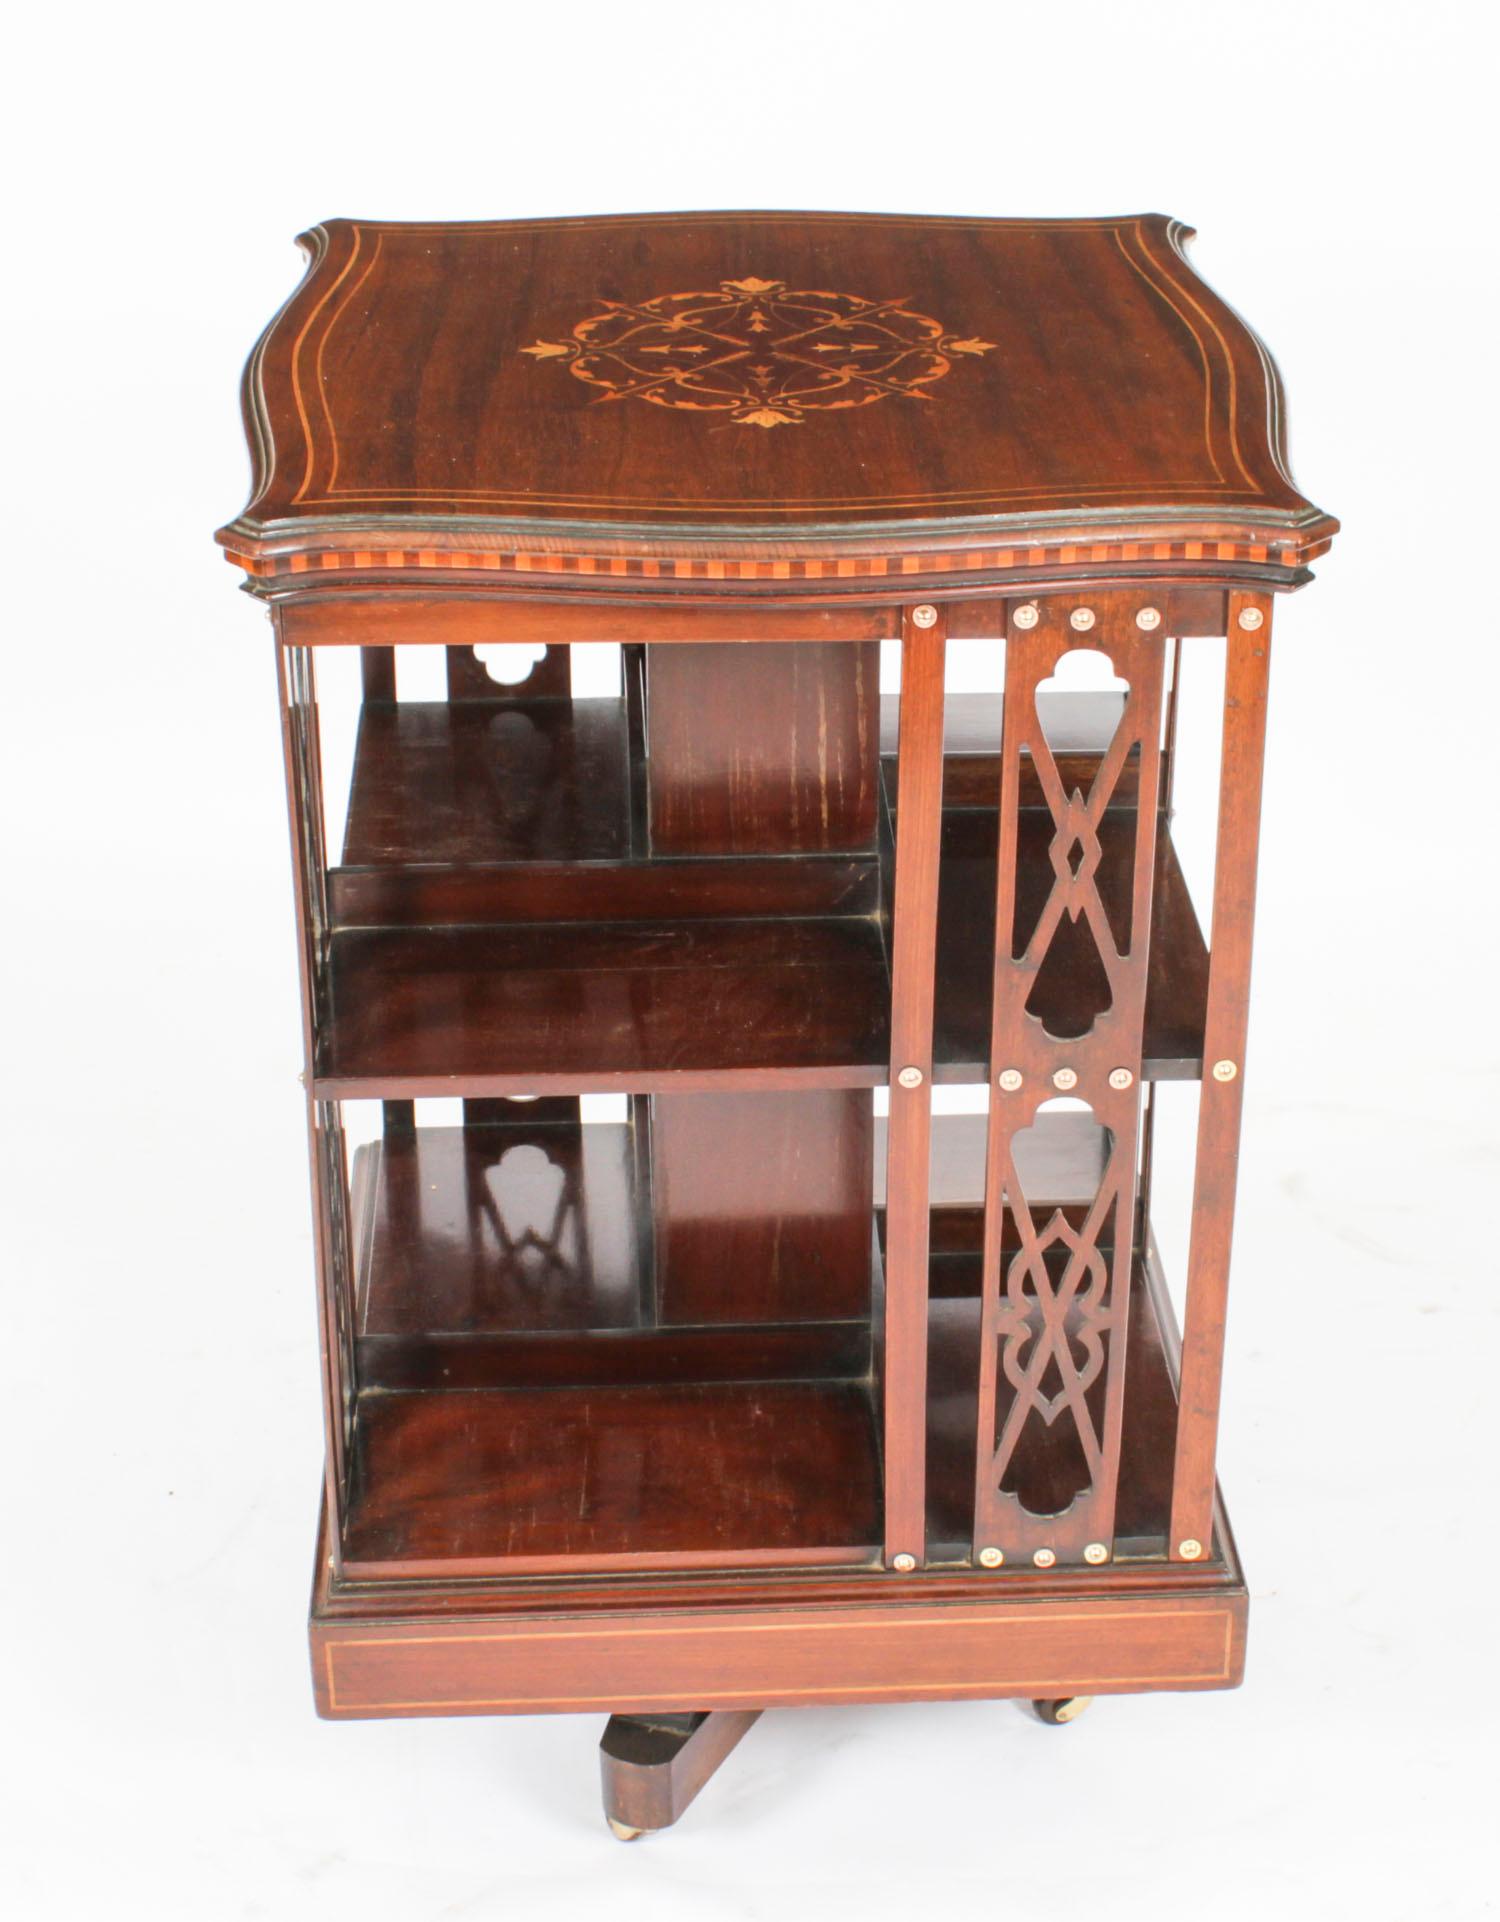 Late Victorian Antique Victorian Marquetry Inlaid Revolving Bookcase 19th Century